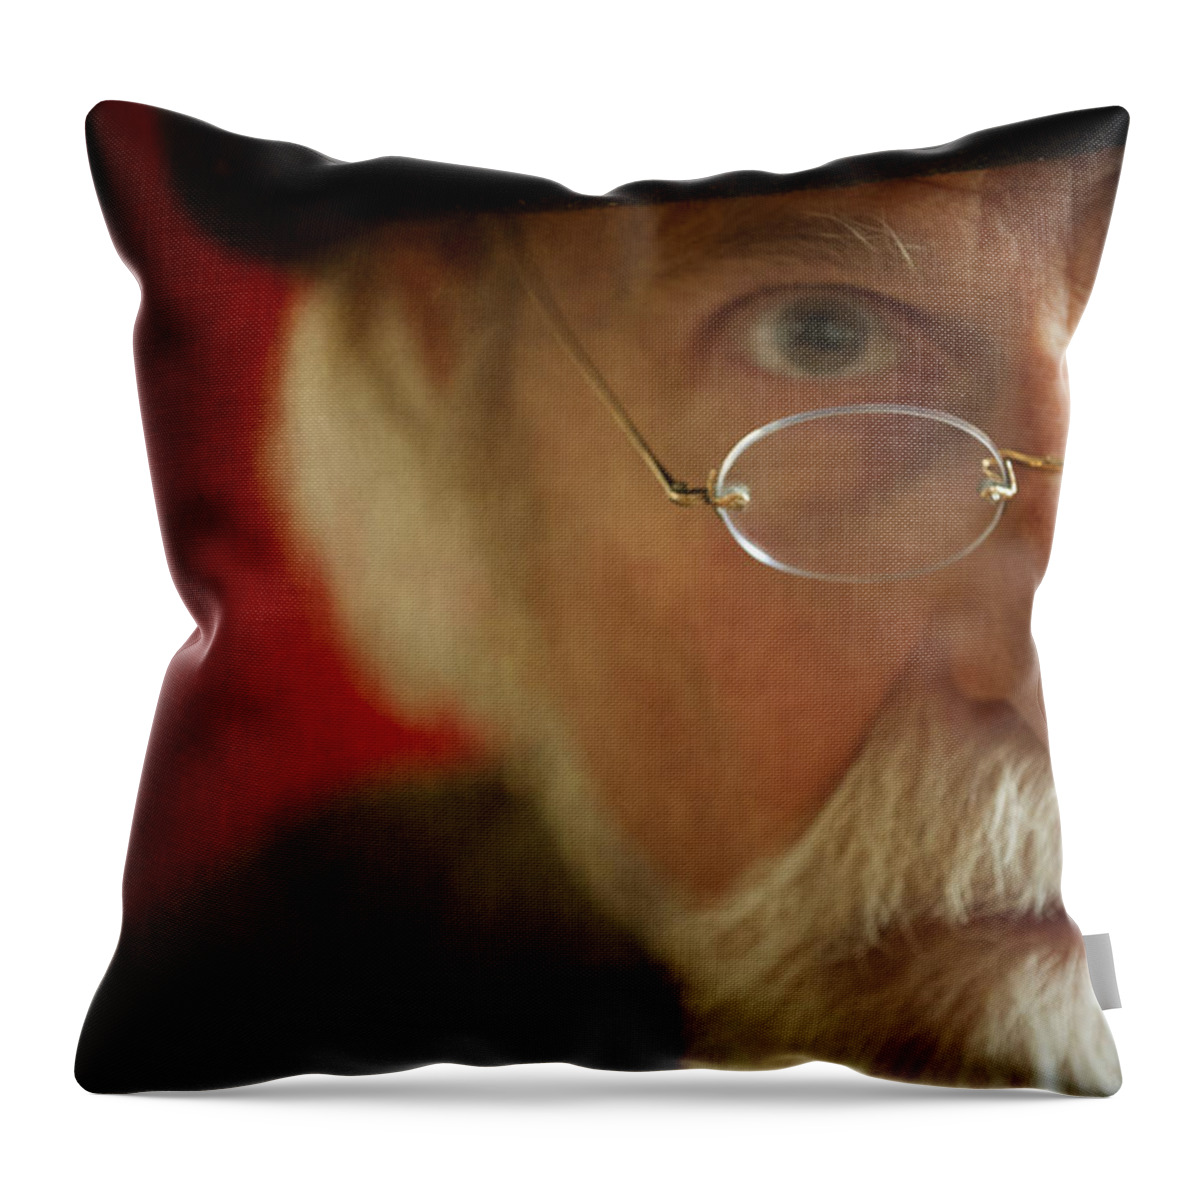 Man Throw Pillow featuring the photograph Senior Man With White Beard And Glasses by Lee Avison